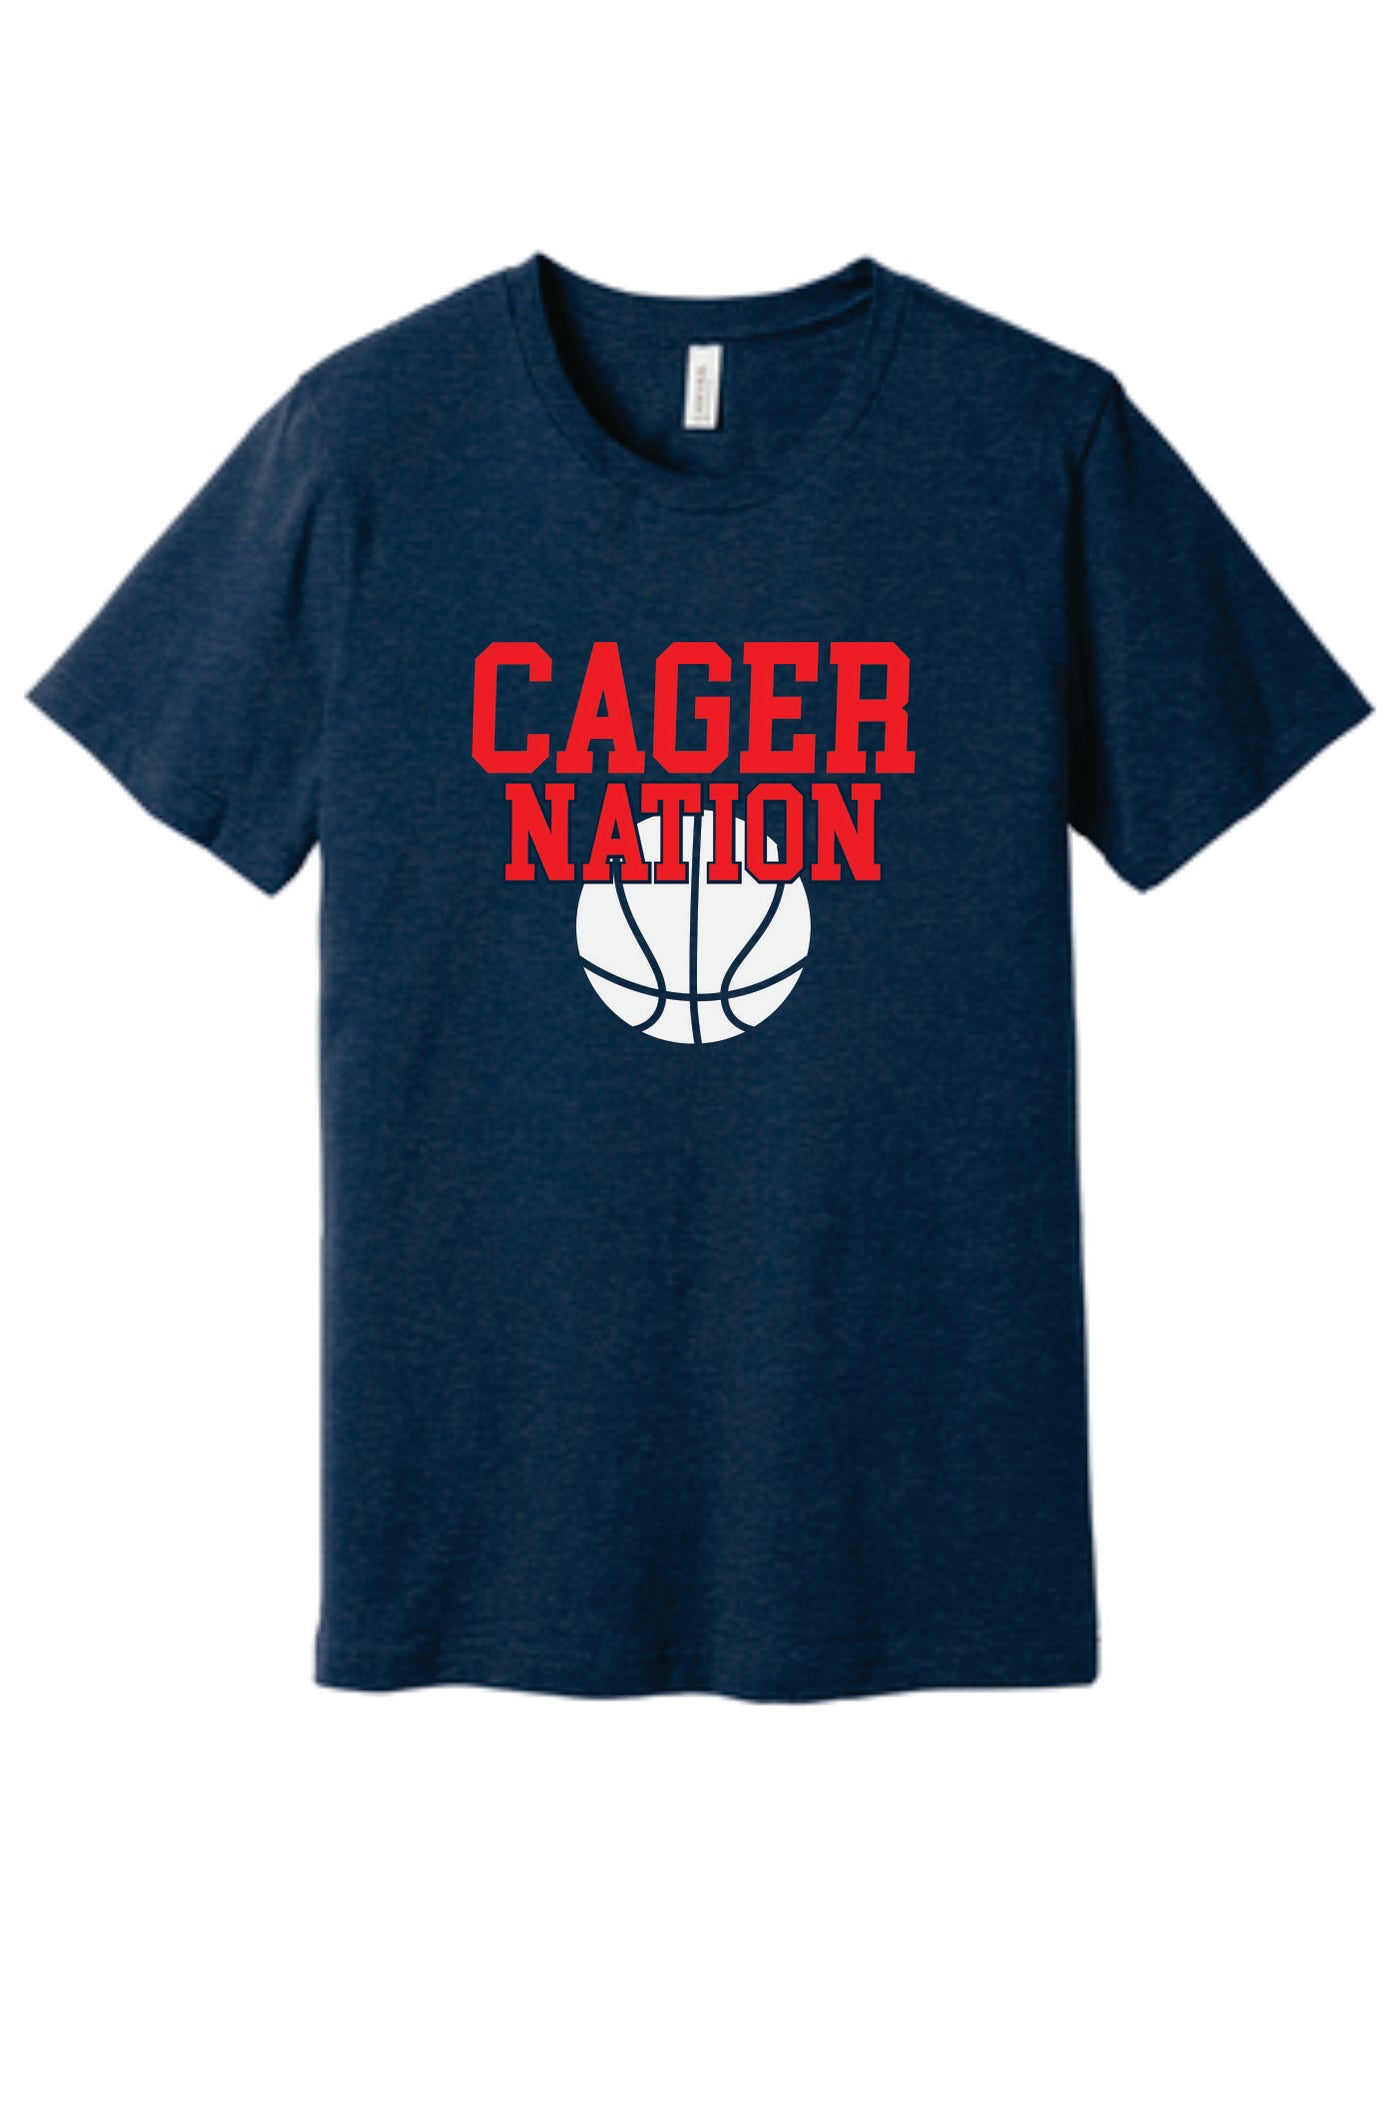 Cager Nation Short Sleeve Graphic T-shirt